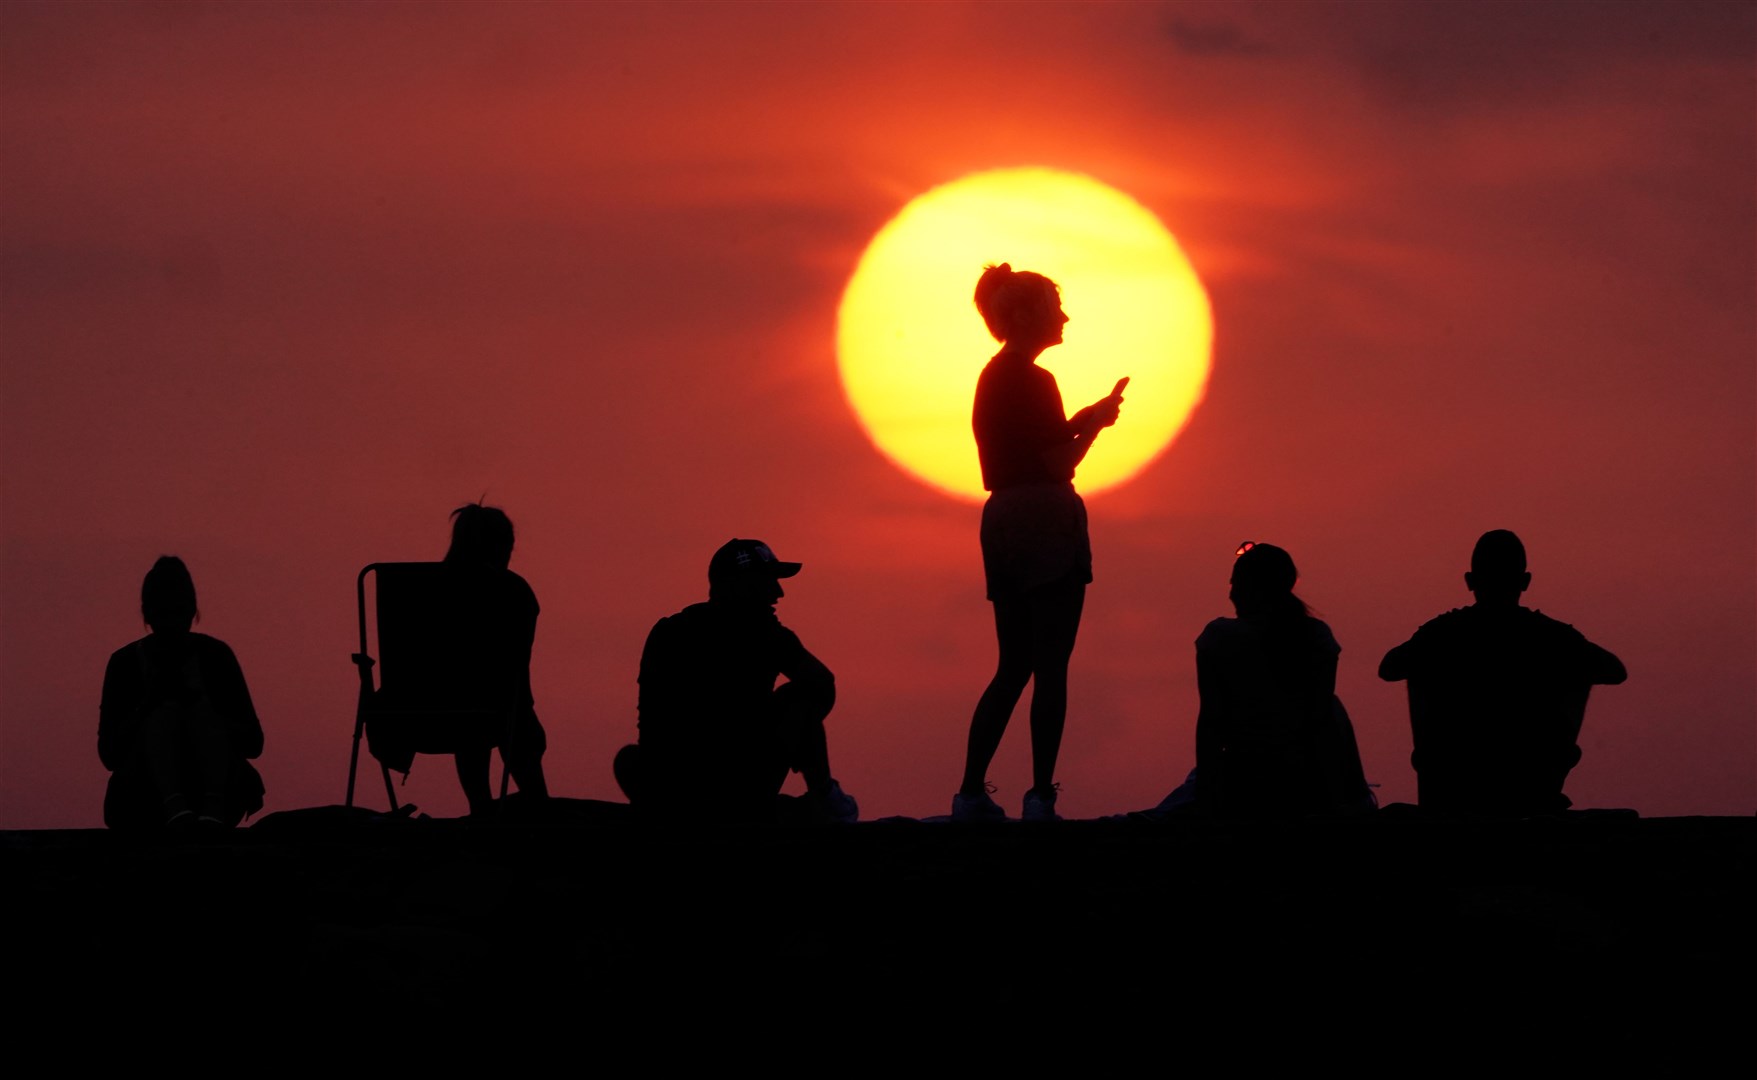 People turn out to watch the sunrise at Cullercoats Bay, North Tyneside in July (Owen Humphreys/PA)